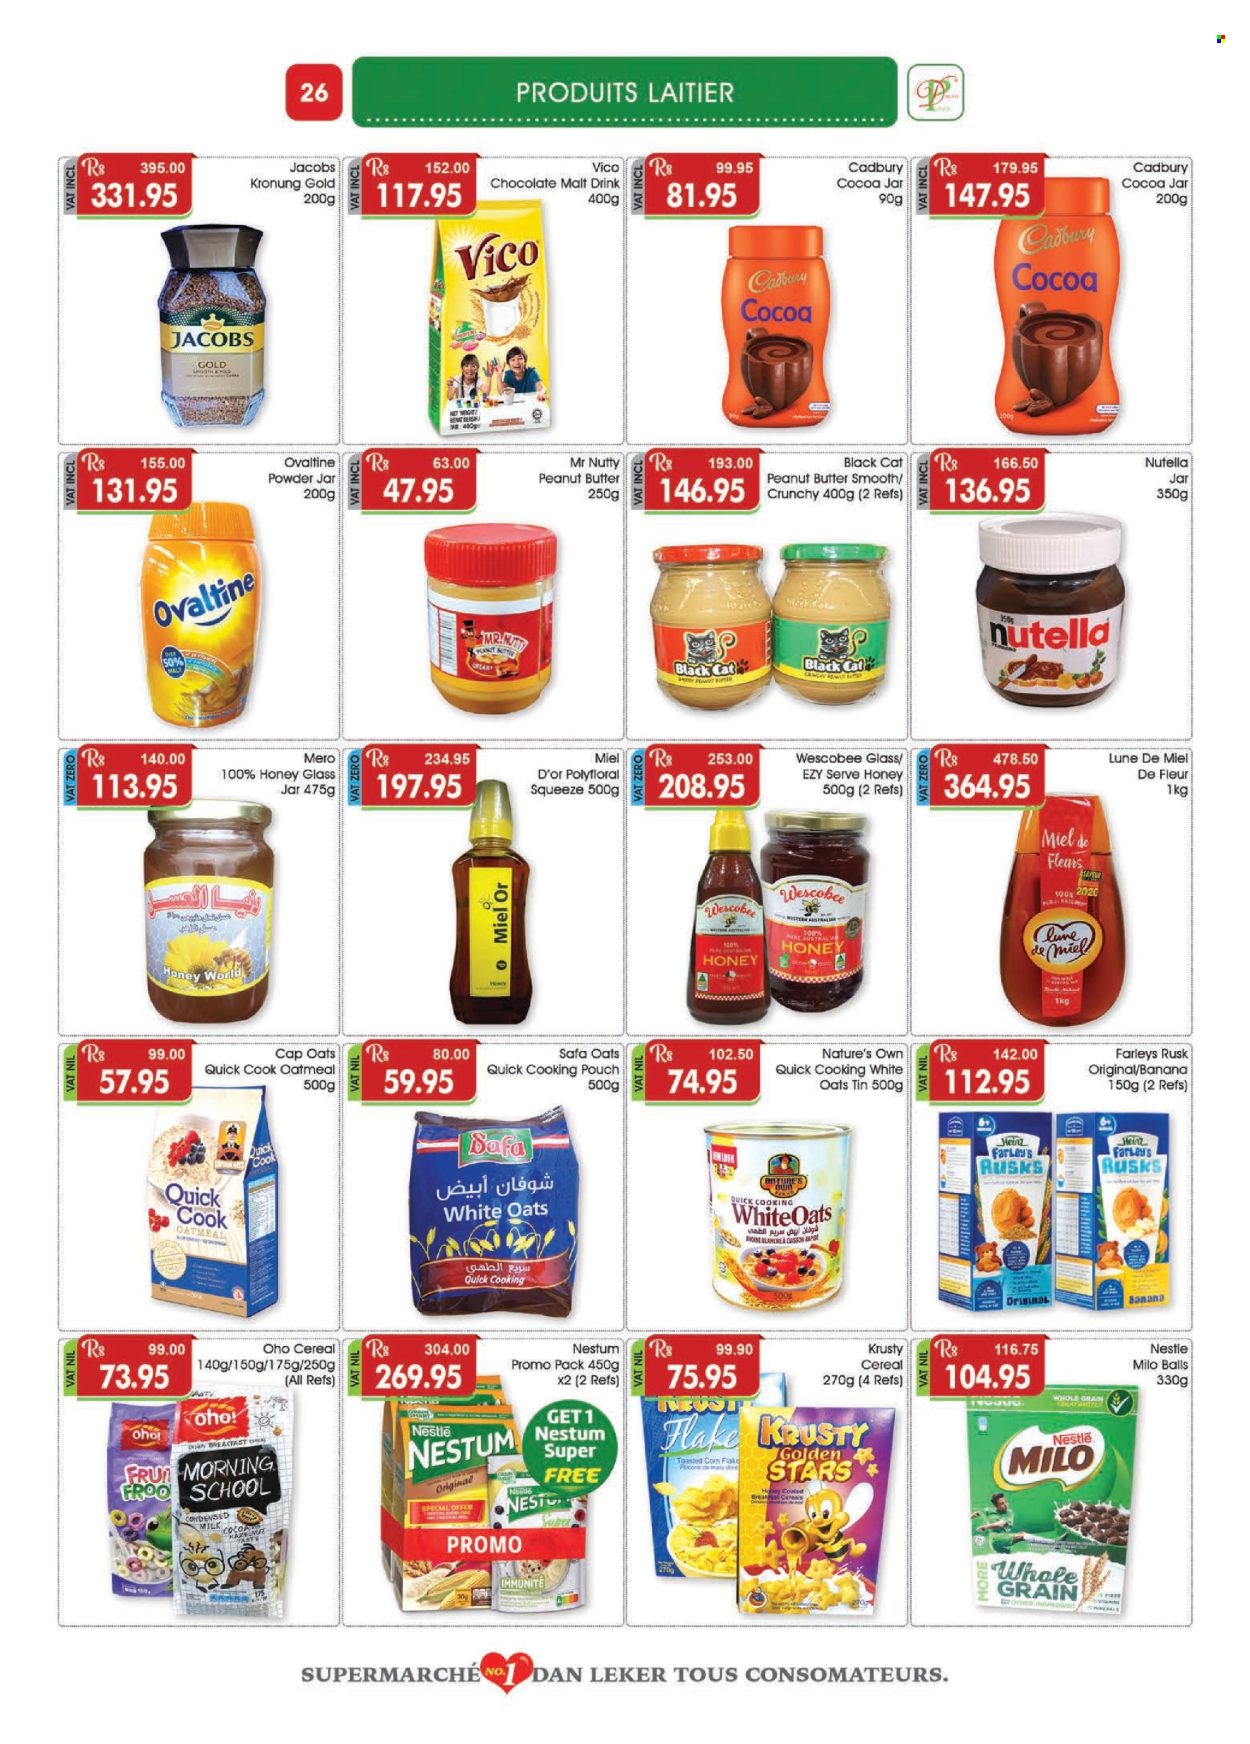 thumbnail - Dreamprice Catalogue - 17.04.2024 - 15.05.2024 - Sales products - rusks, corn, condensed milk, Milo, Cadbury, oatmeal, cereals, peanut butter, hazelnut spread, Jacobs, jar, Nature's Own, Nestlé, Heinz, Nutella. Page 26.